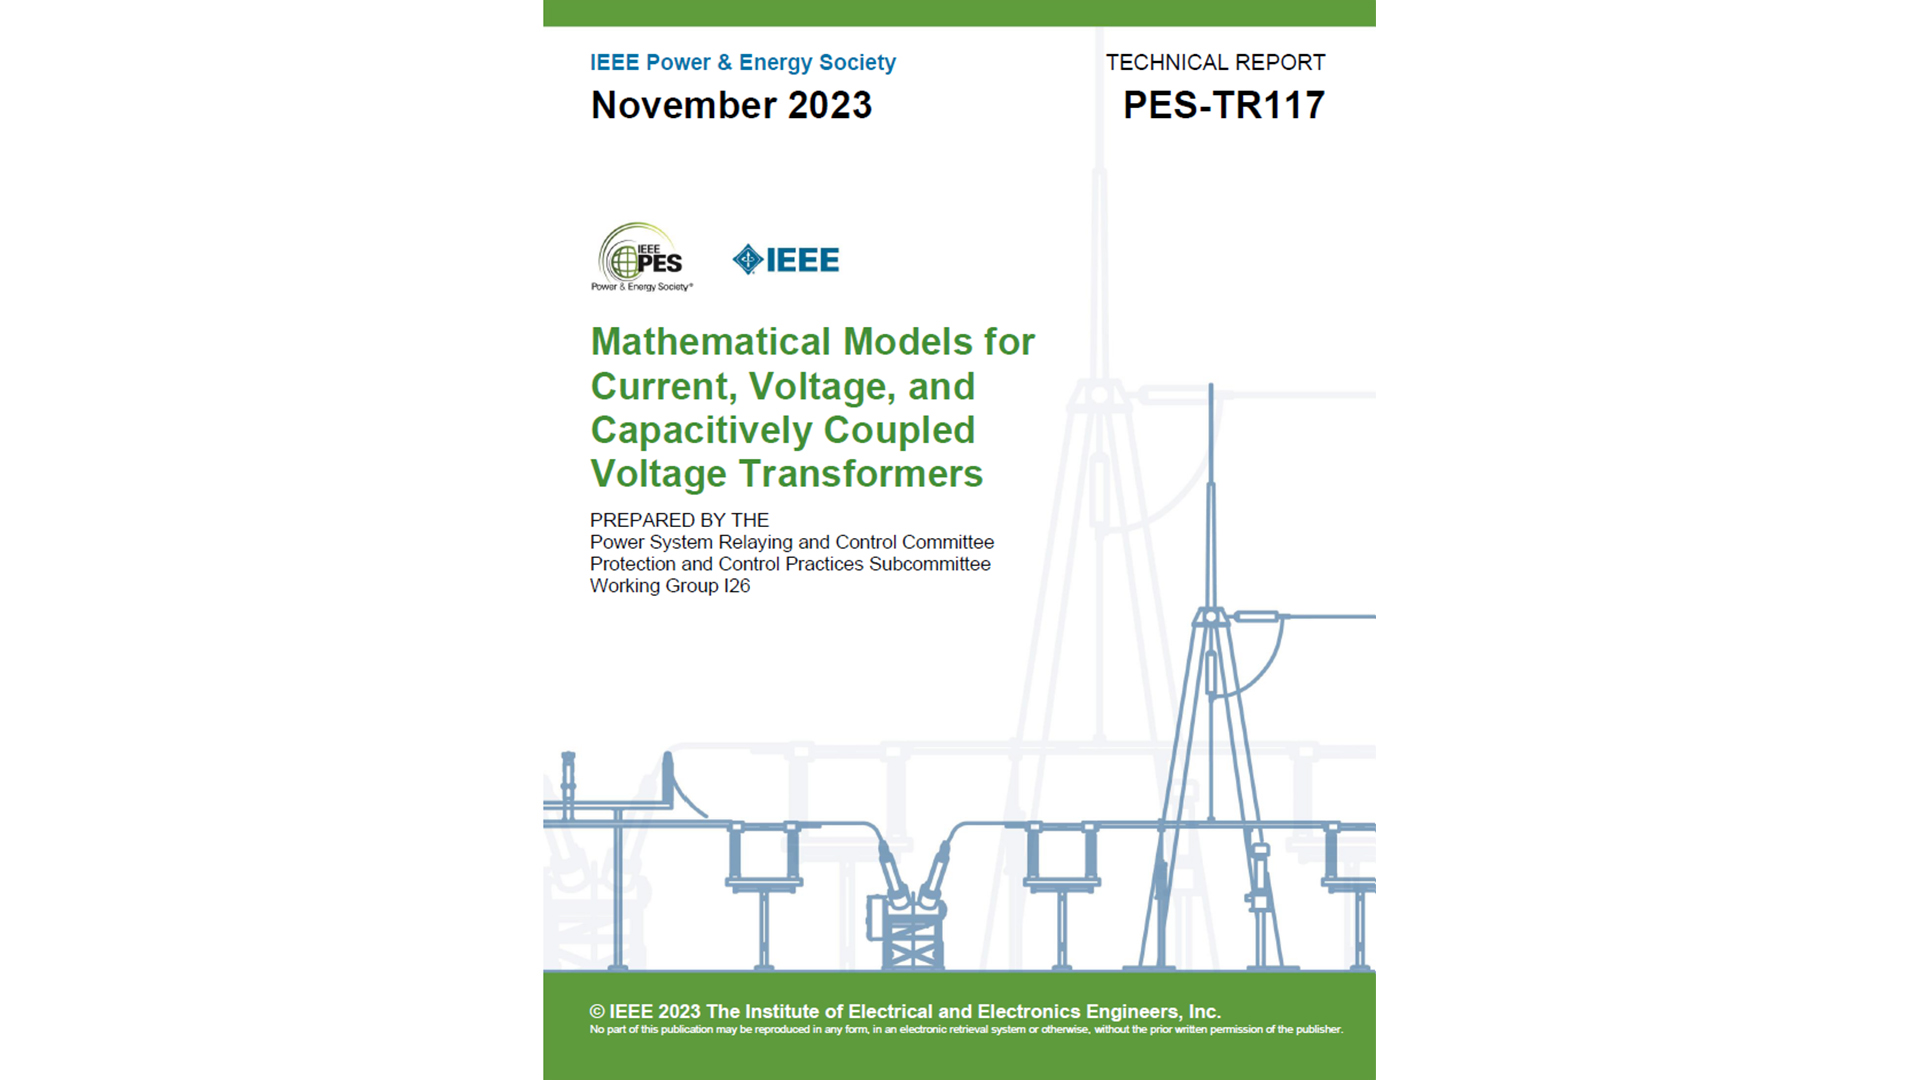 Mathematical Models for Current, Voltage, and Capacitively Coupled Voltage Transformers (TR117)